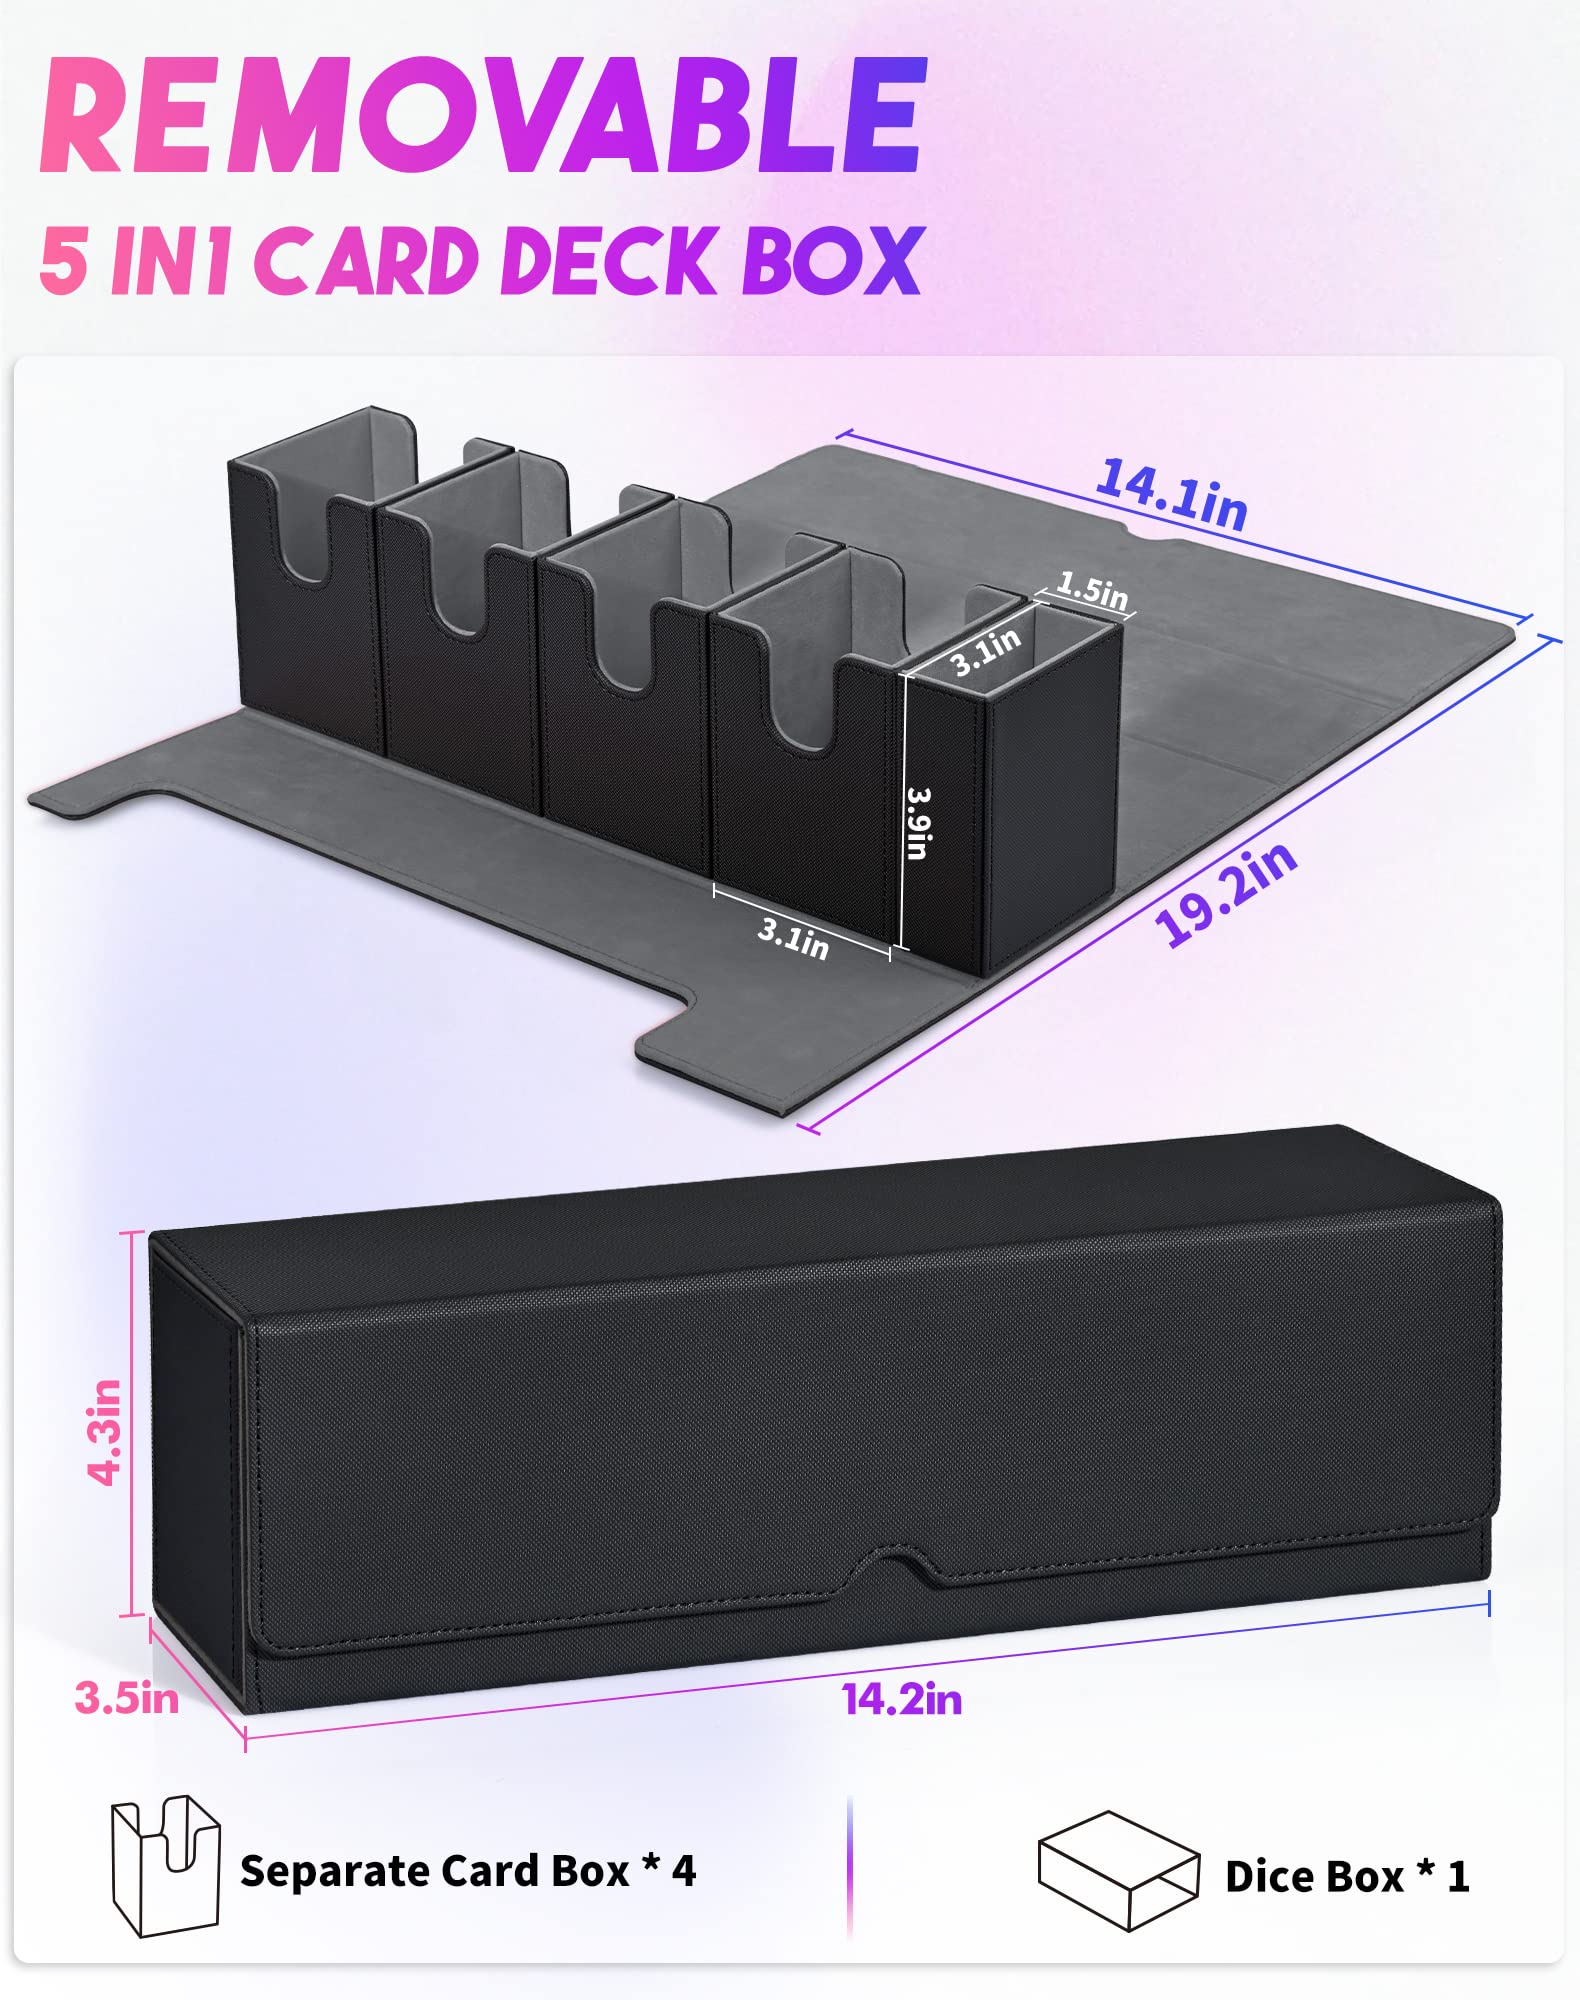 UAONO Card Storage Box with Dice Tray for MTG Yugioh, 5 in 1 Card Deck Case Holds 900+ Unsleeved Cards, Strong Magnet Card Organizer Compatible with Magic Commander TCG CCG Sports Cards (Black)